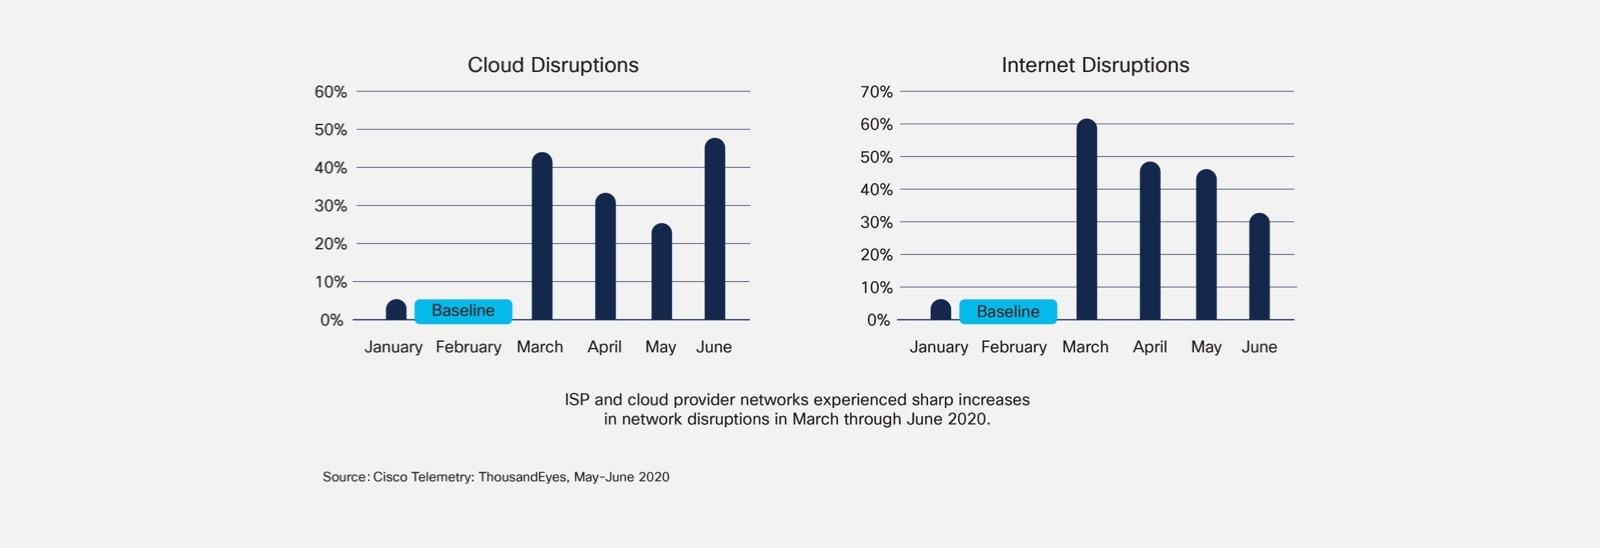 Figure 6. Cloud and Internet Service Disruption Increases During Pandemic  